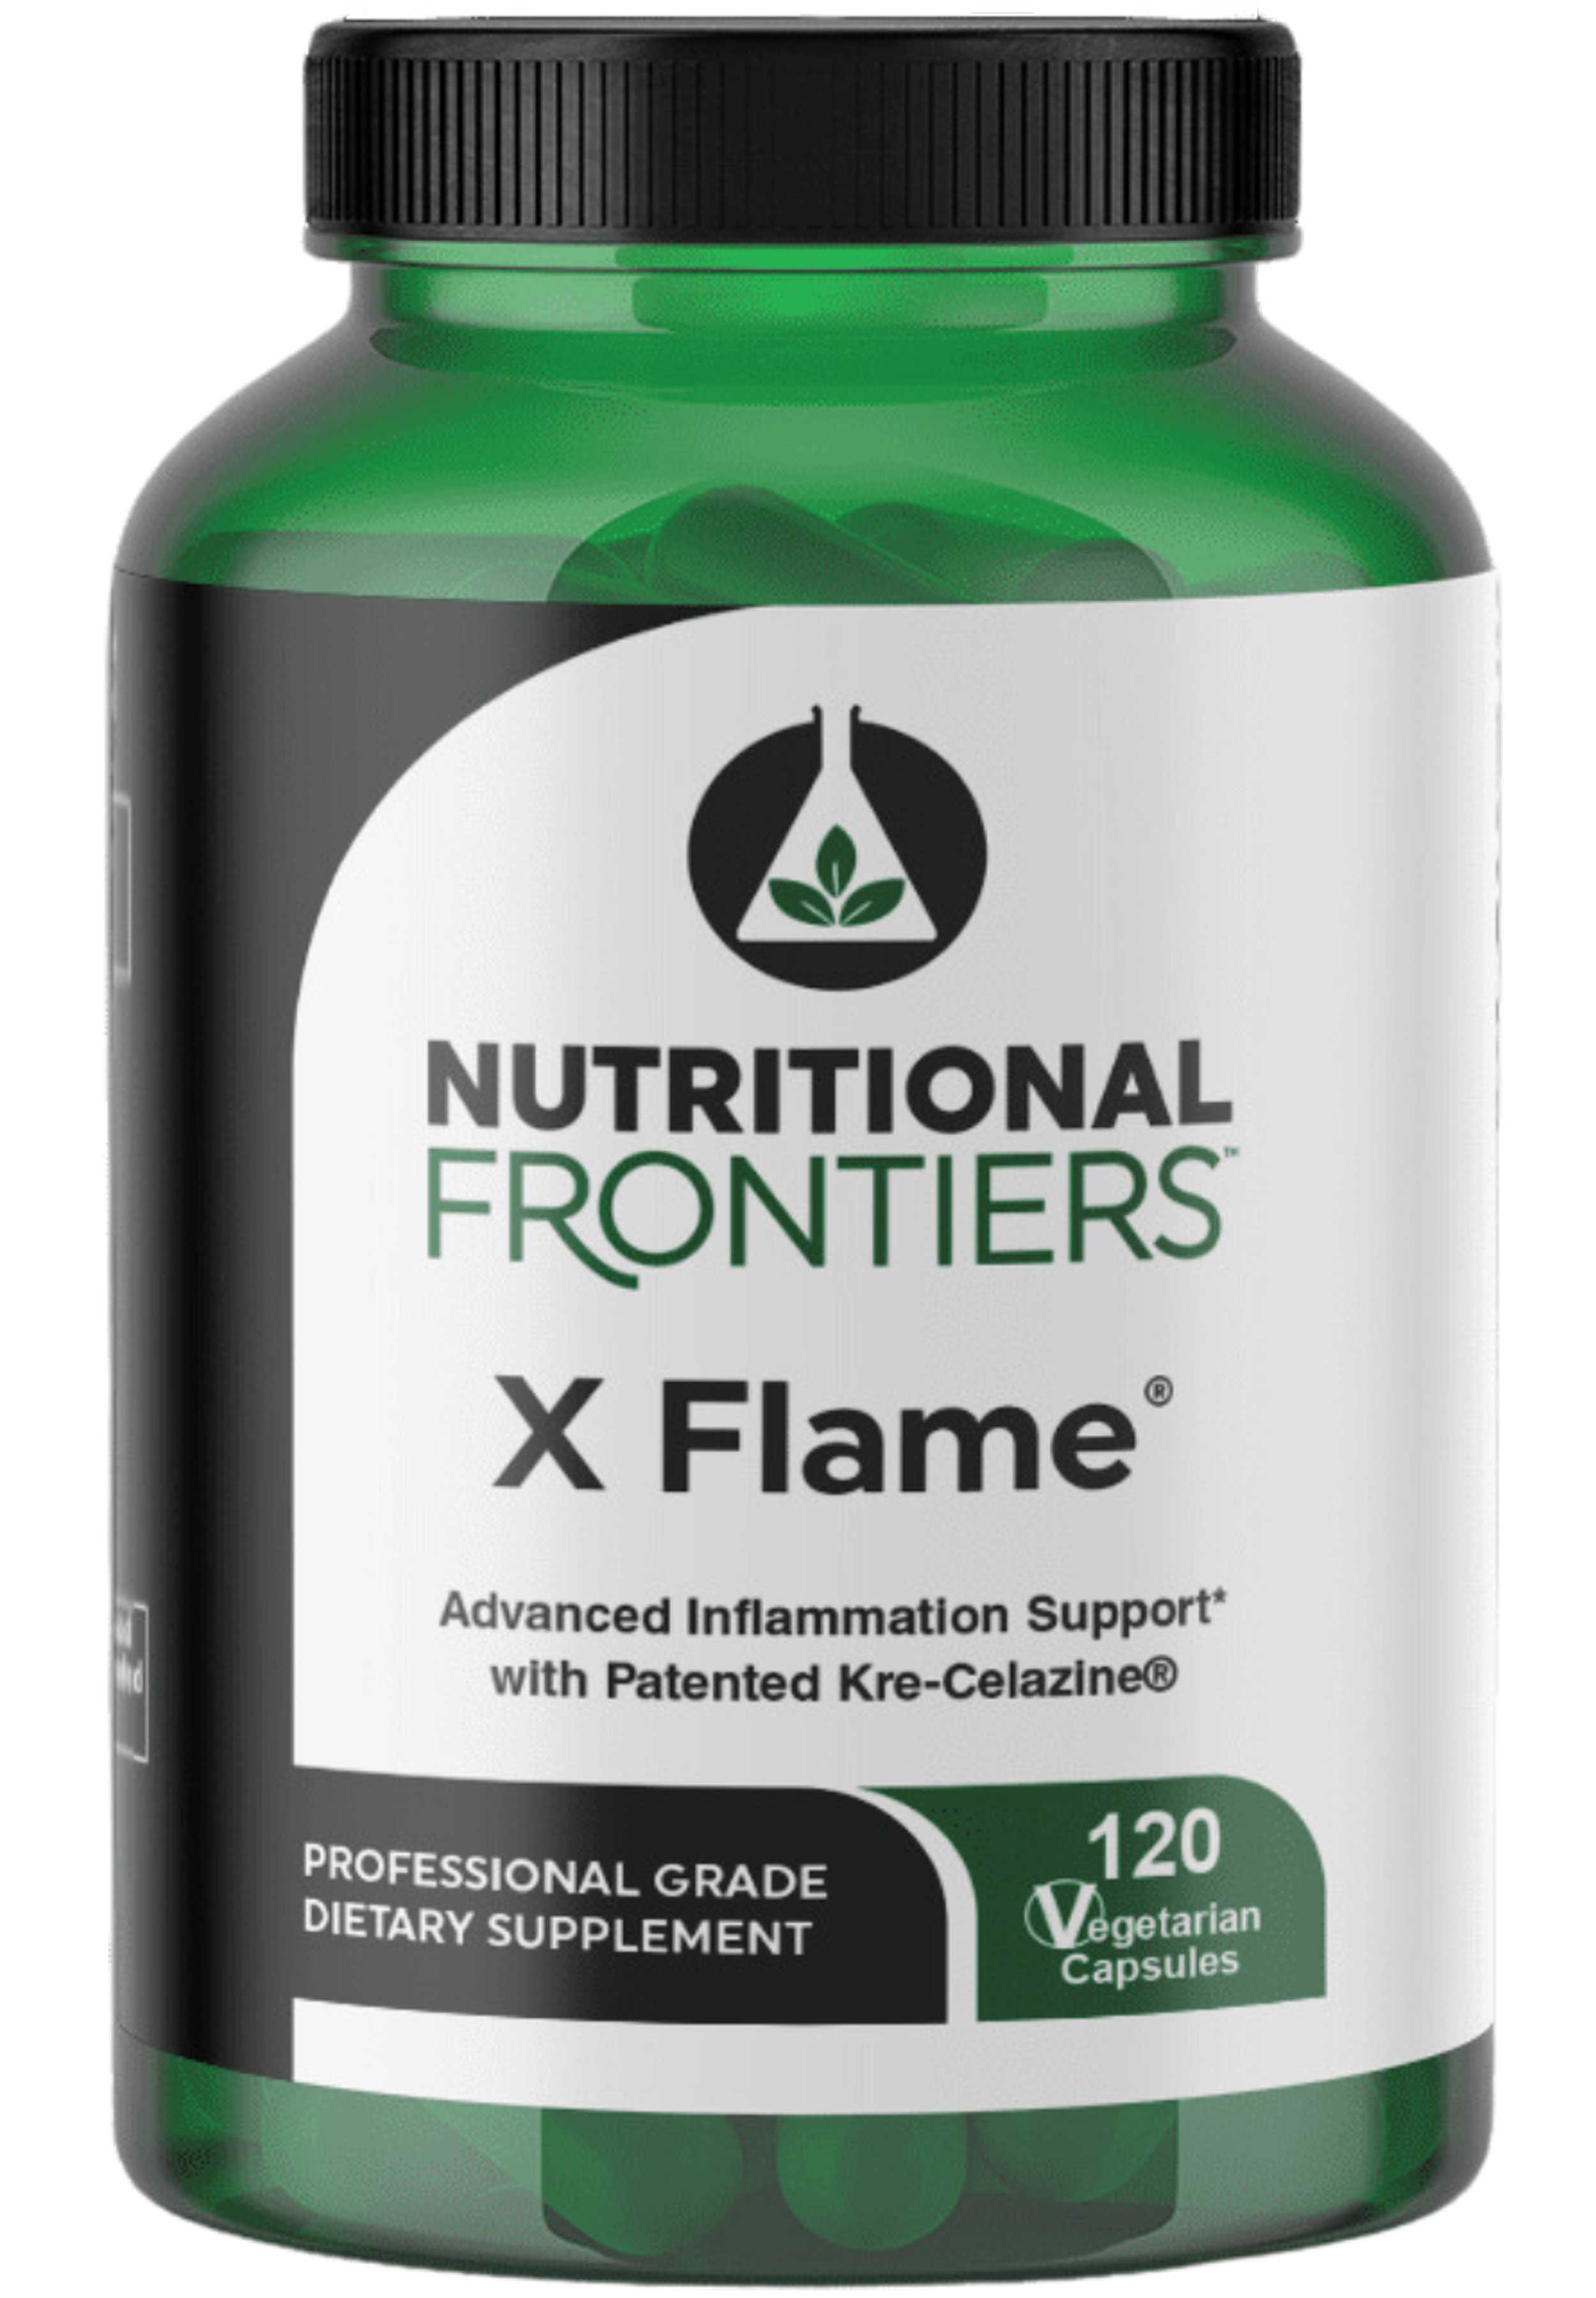 Nutritional Frontiers X Flame